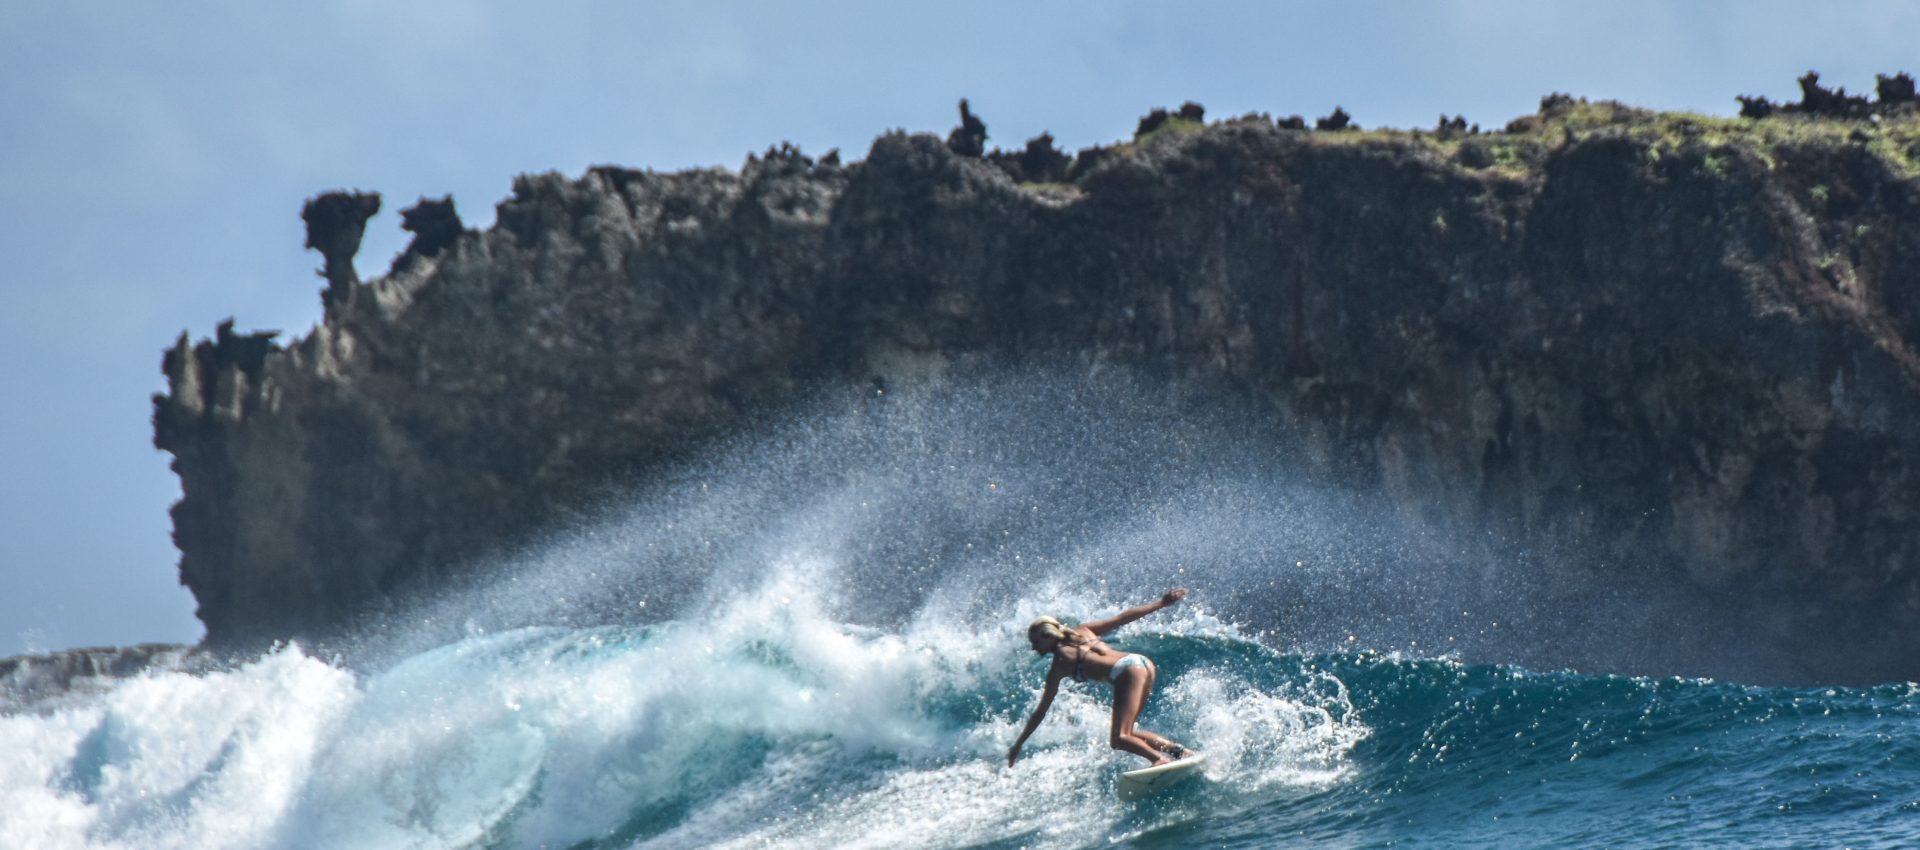 Having a fun time on a board is easy, the island is surrounded by world-class reefs and turquoise water.